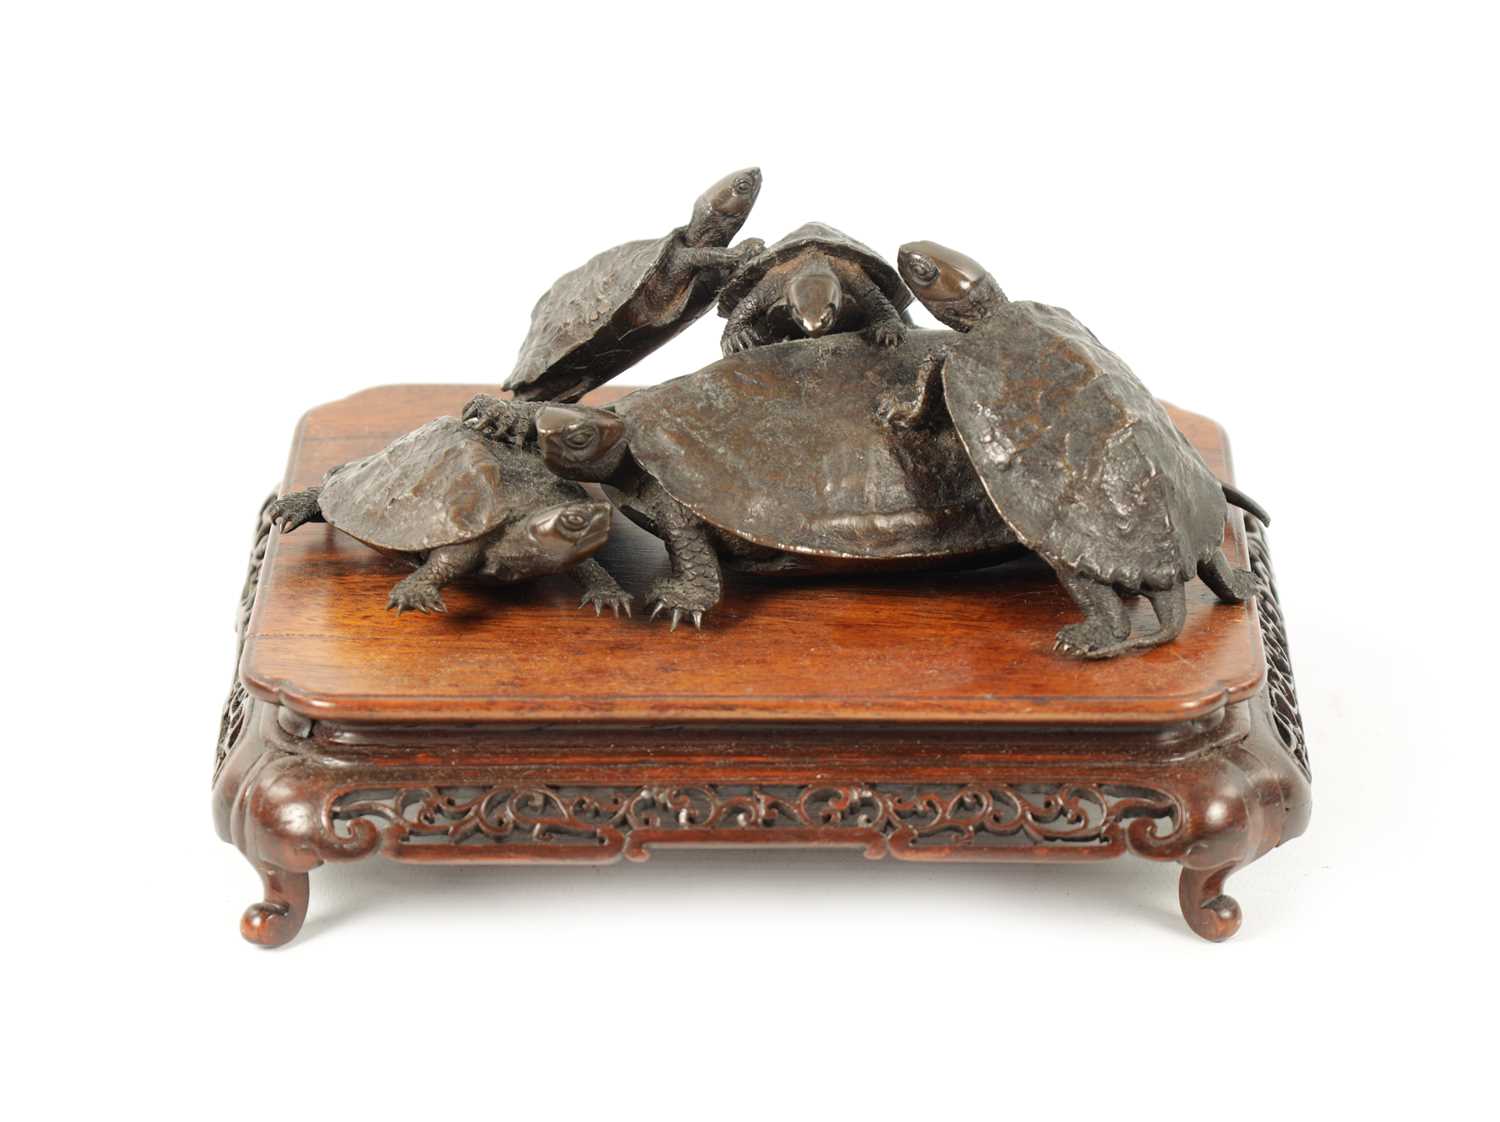 A FINE JAPANESE MEIJI PERIOD BRONZE SCULPTURE OF A GROUP OF TURTLES